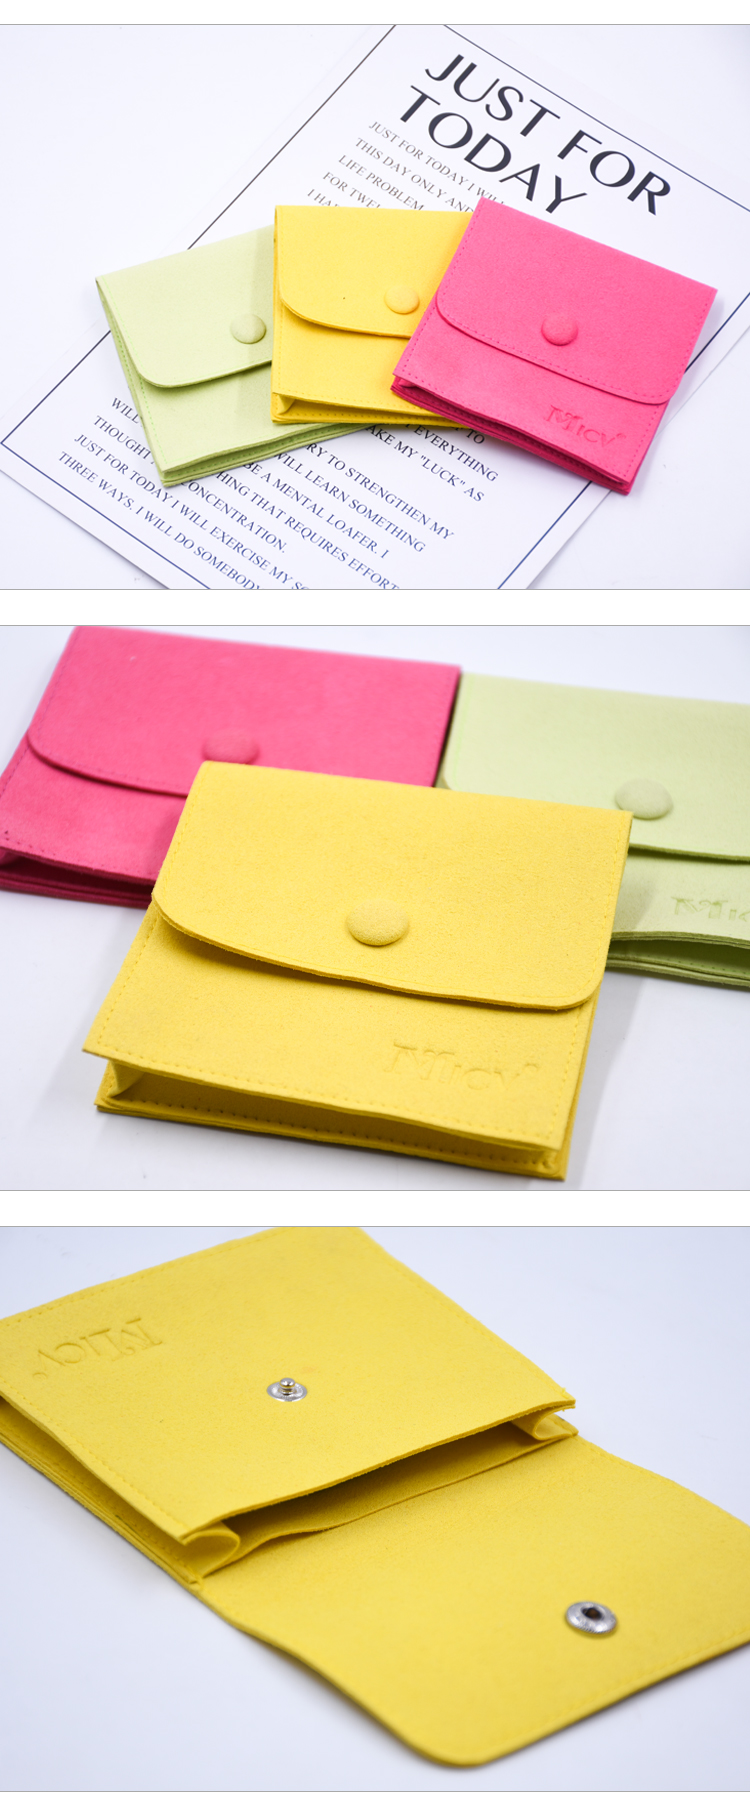 Hot selling fashion suede flocking flap envelope jewelry storage pouch velvet gift bag with necklace insert